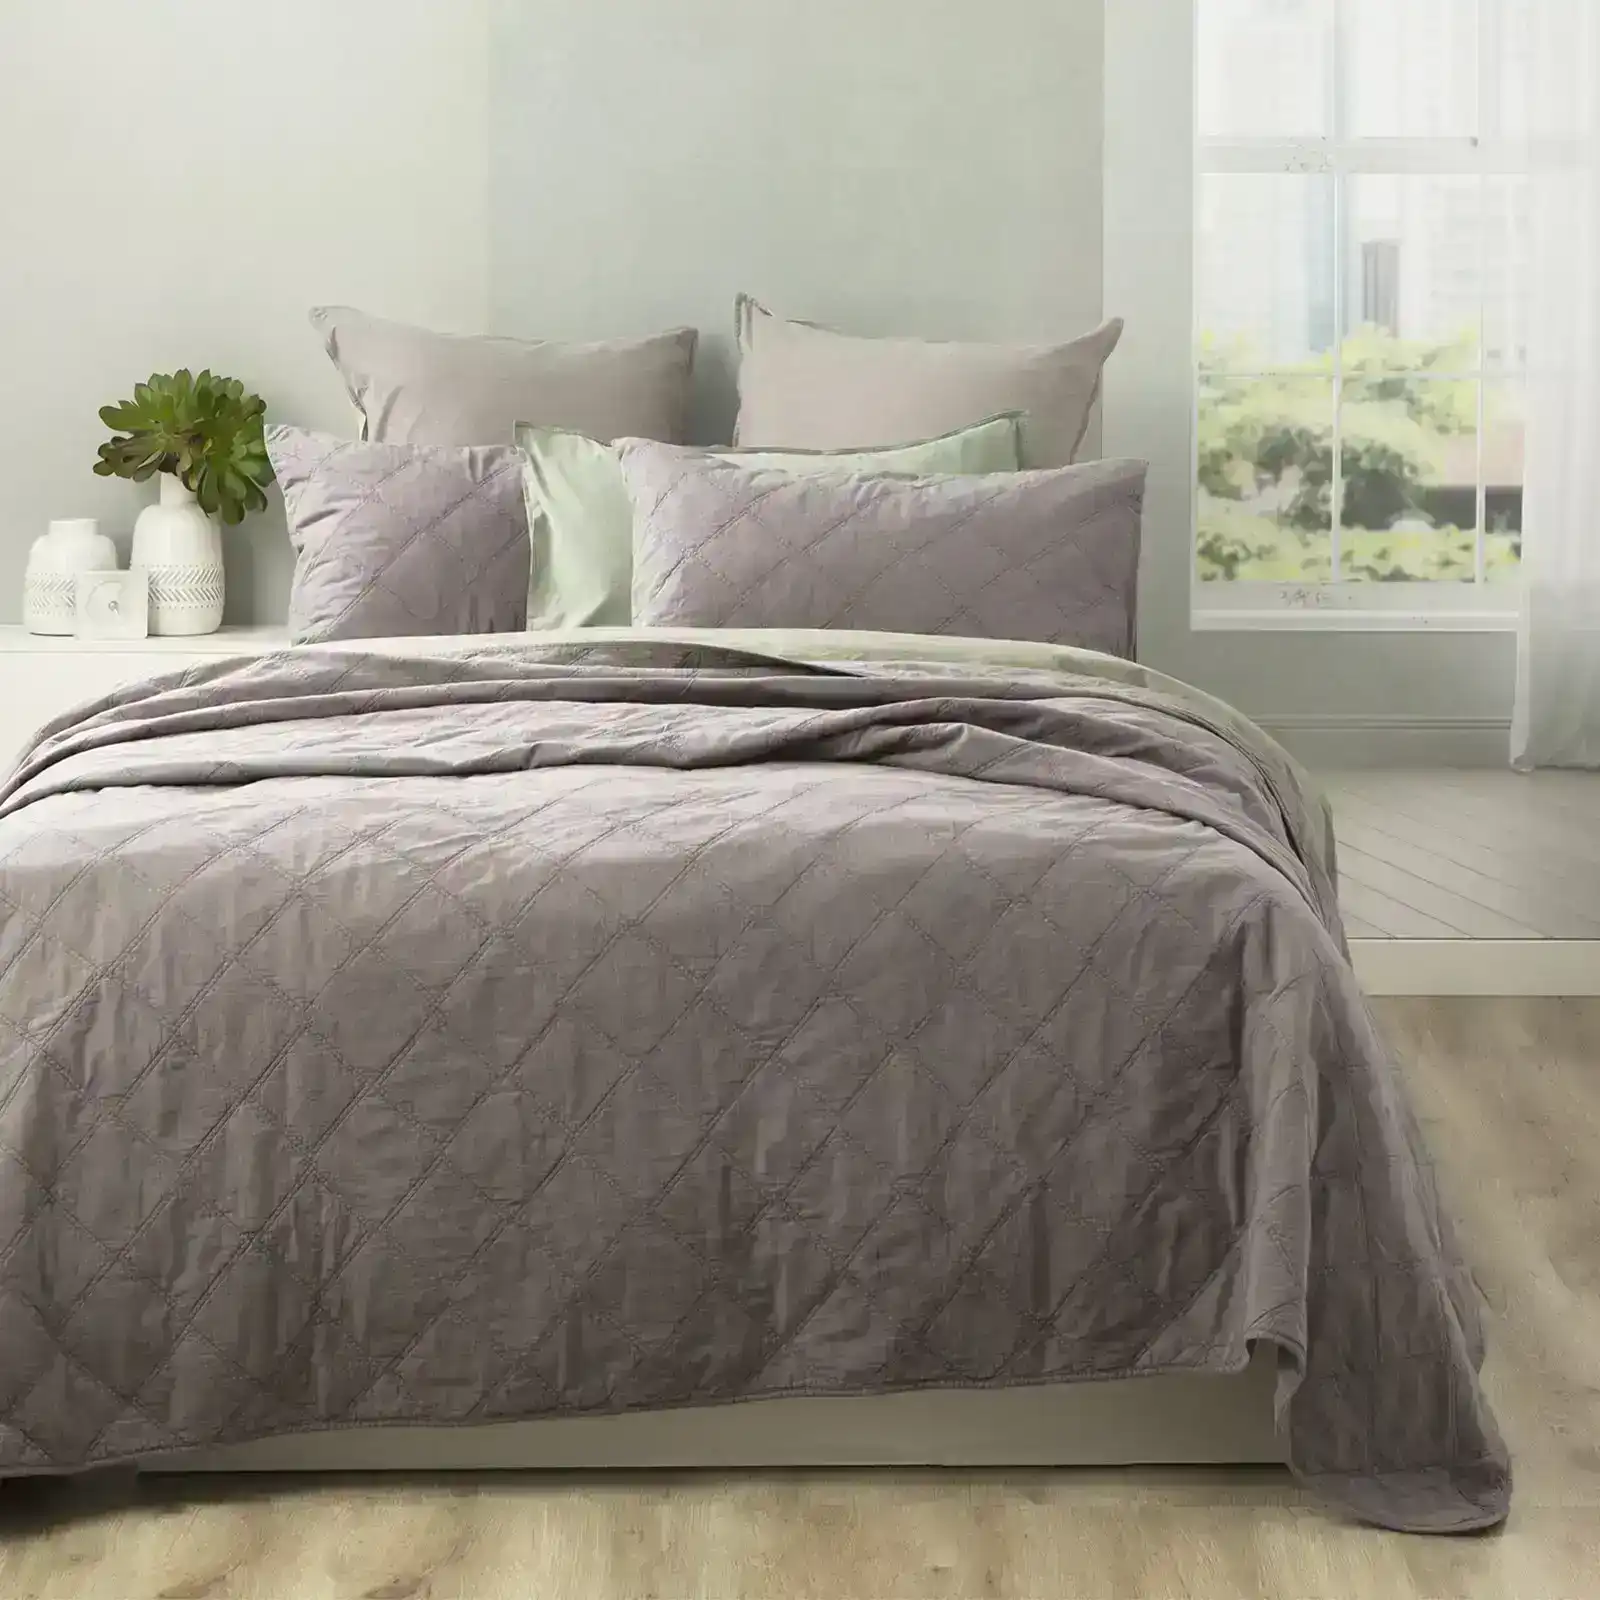 Renee Taylor Attwood VT Queen/King Bed Quilted Coverlet Stone Washed Cotton CHCL